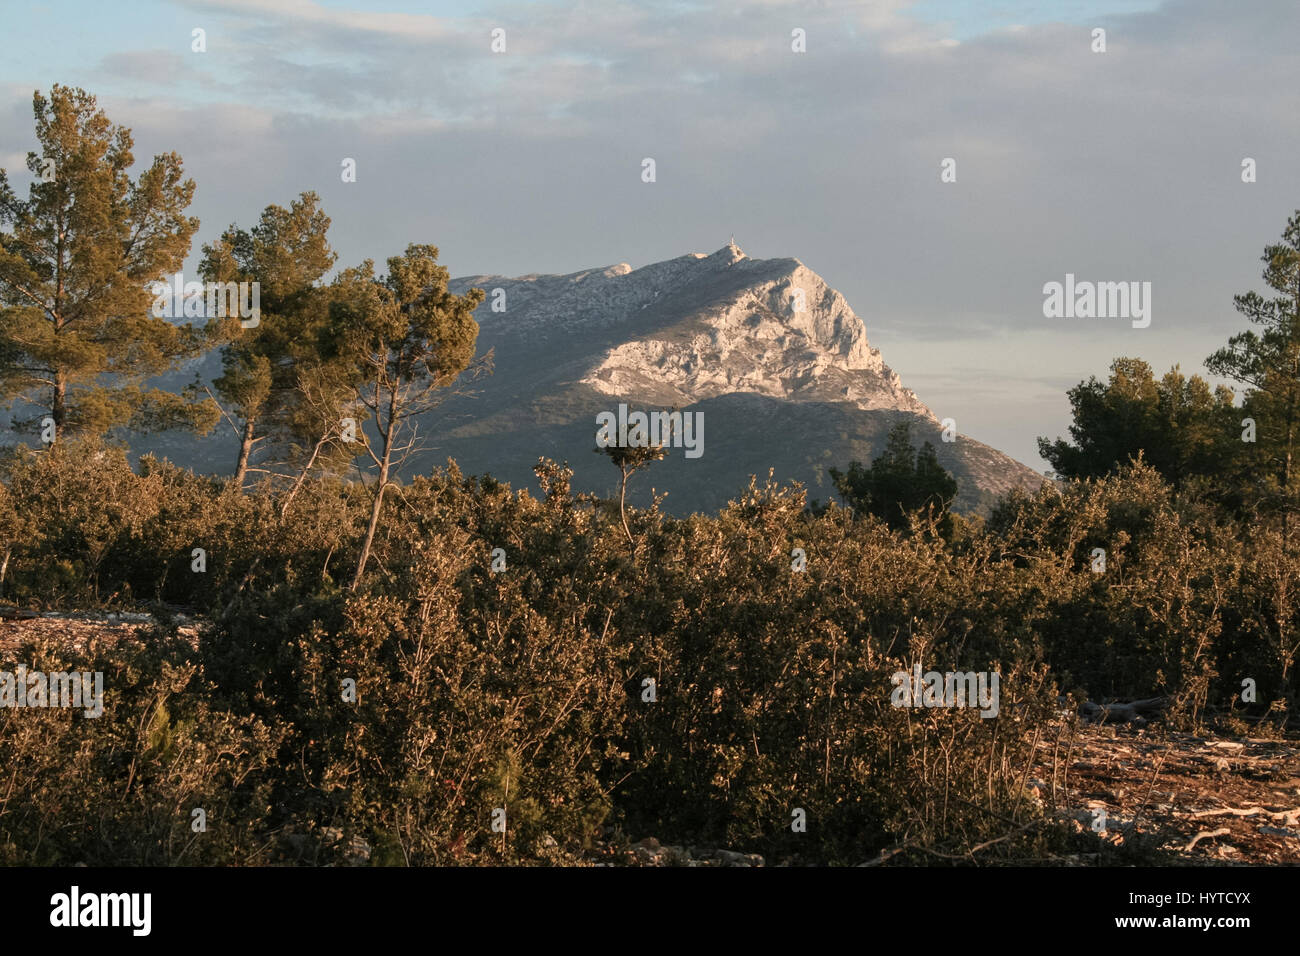 Sainte Victoire mount taken from its surrounding forest at sunset in winter. Sainte Victoire mountain is one of the symbols of the city of Aix-en-Pro Stock Photo